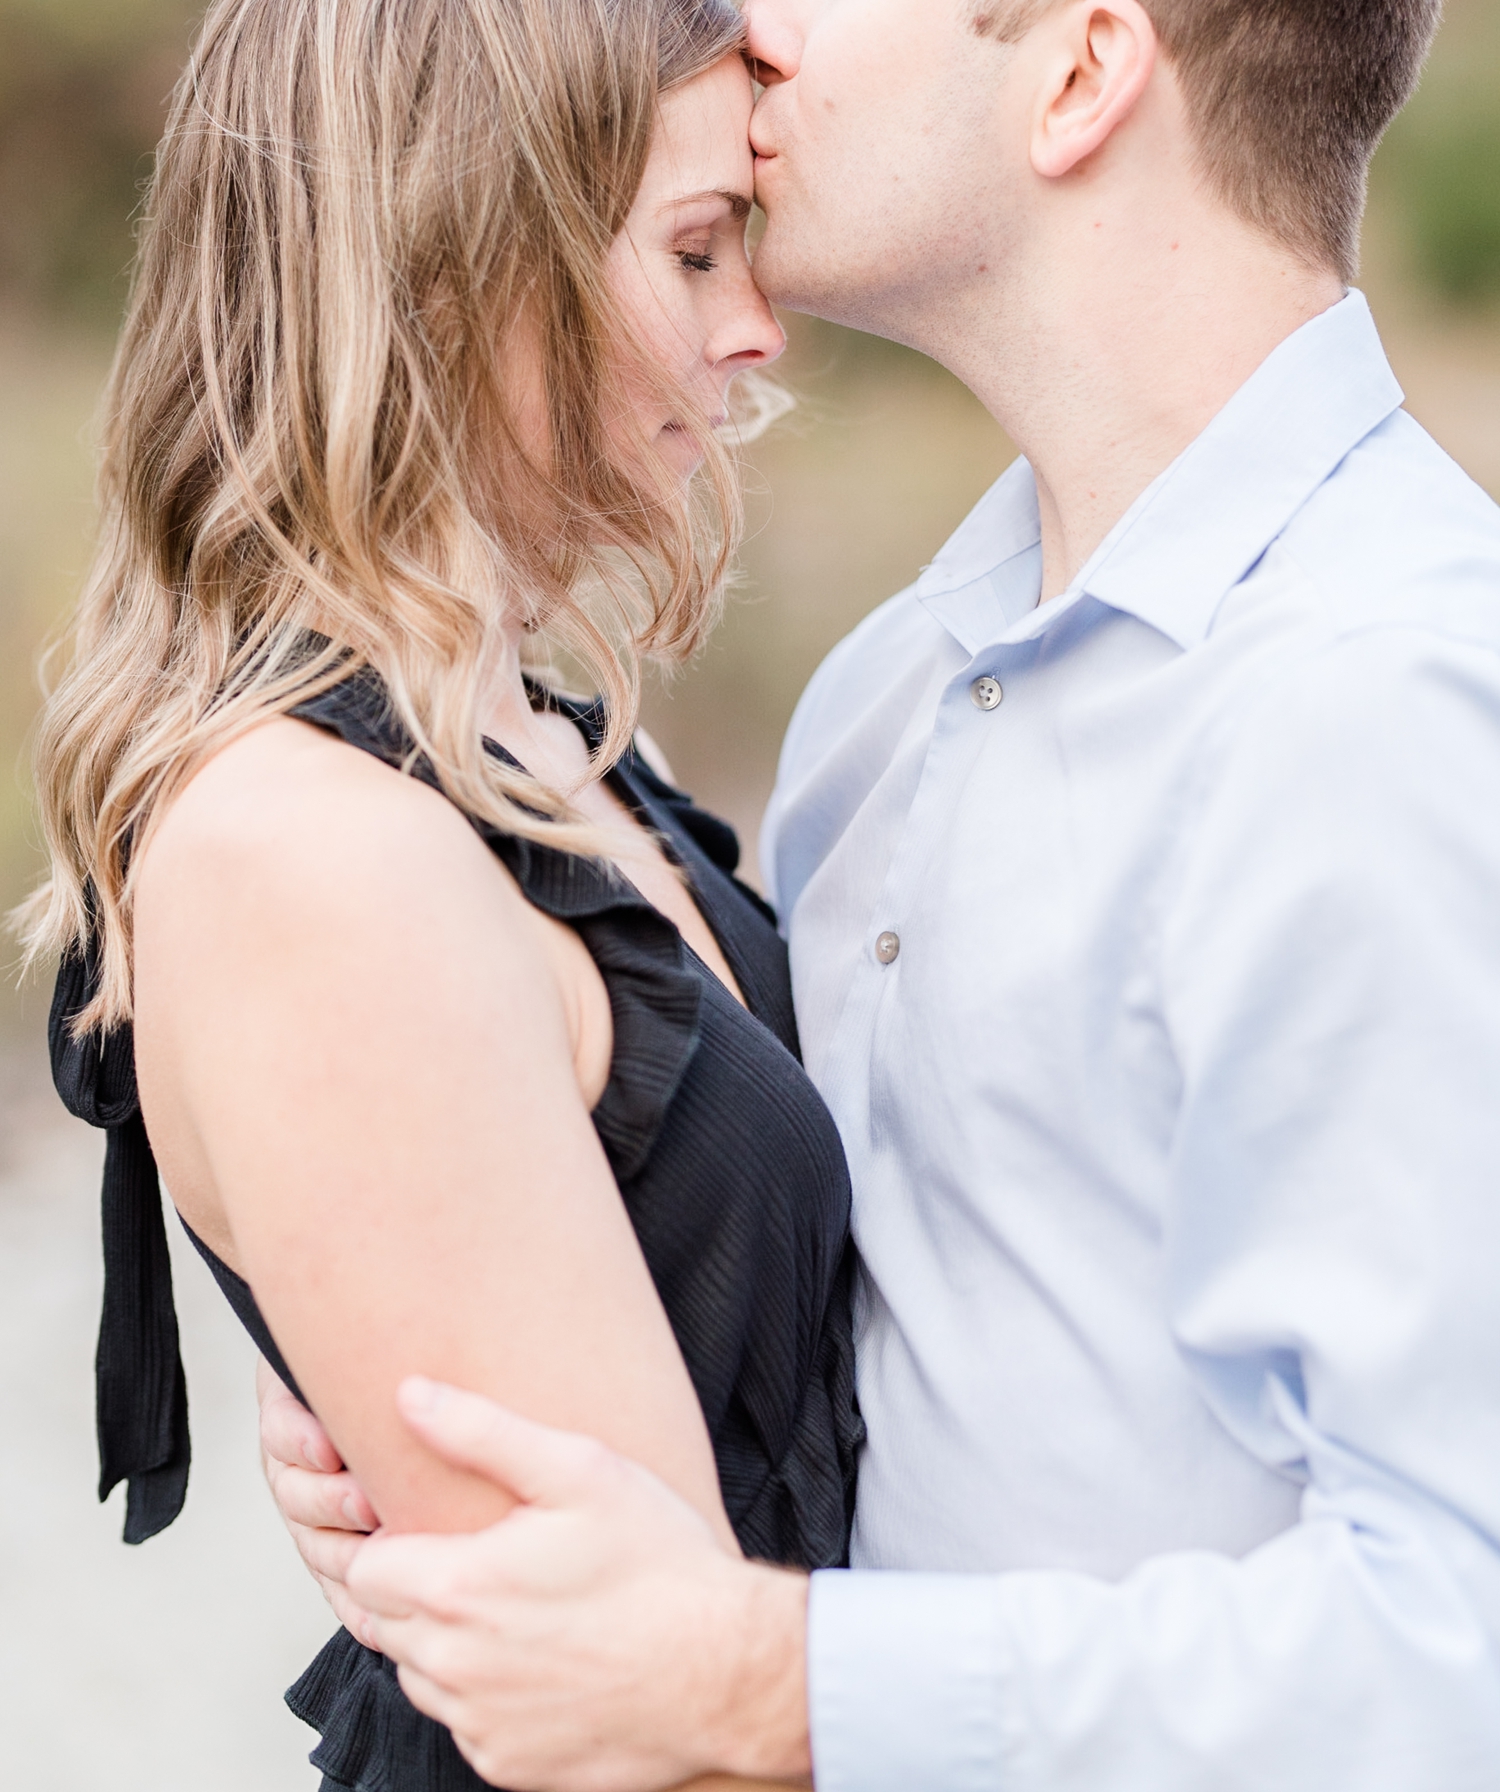 A sweet fall engagement session by Courtney Rudicel Fort Wayne Wedding Photographer